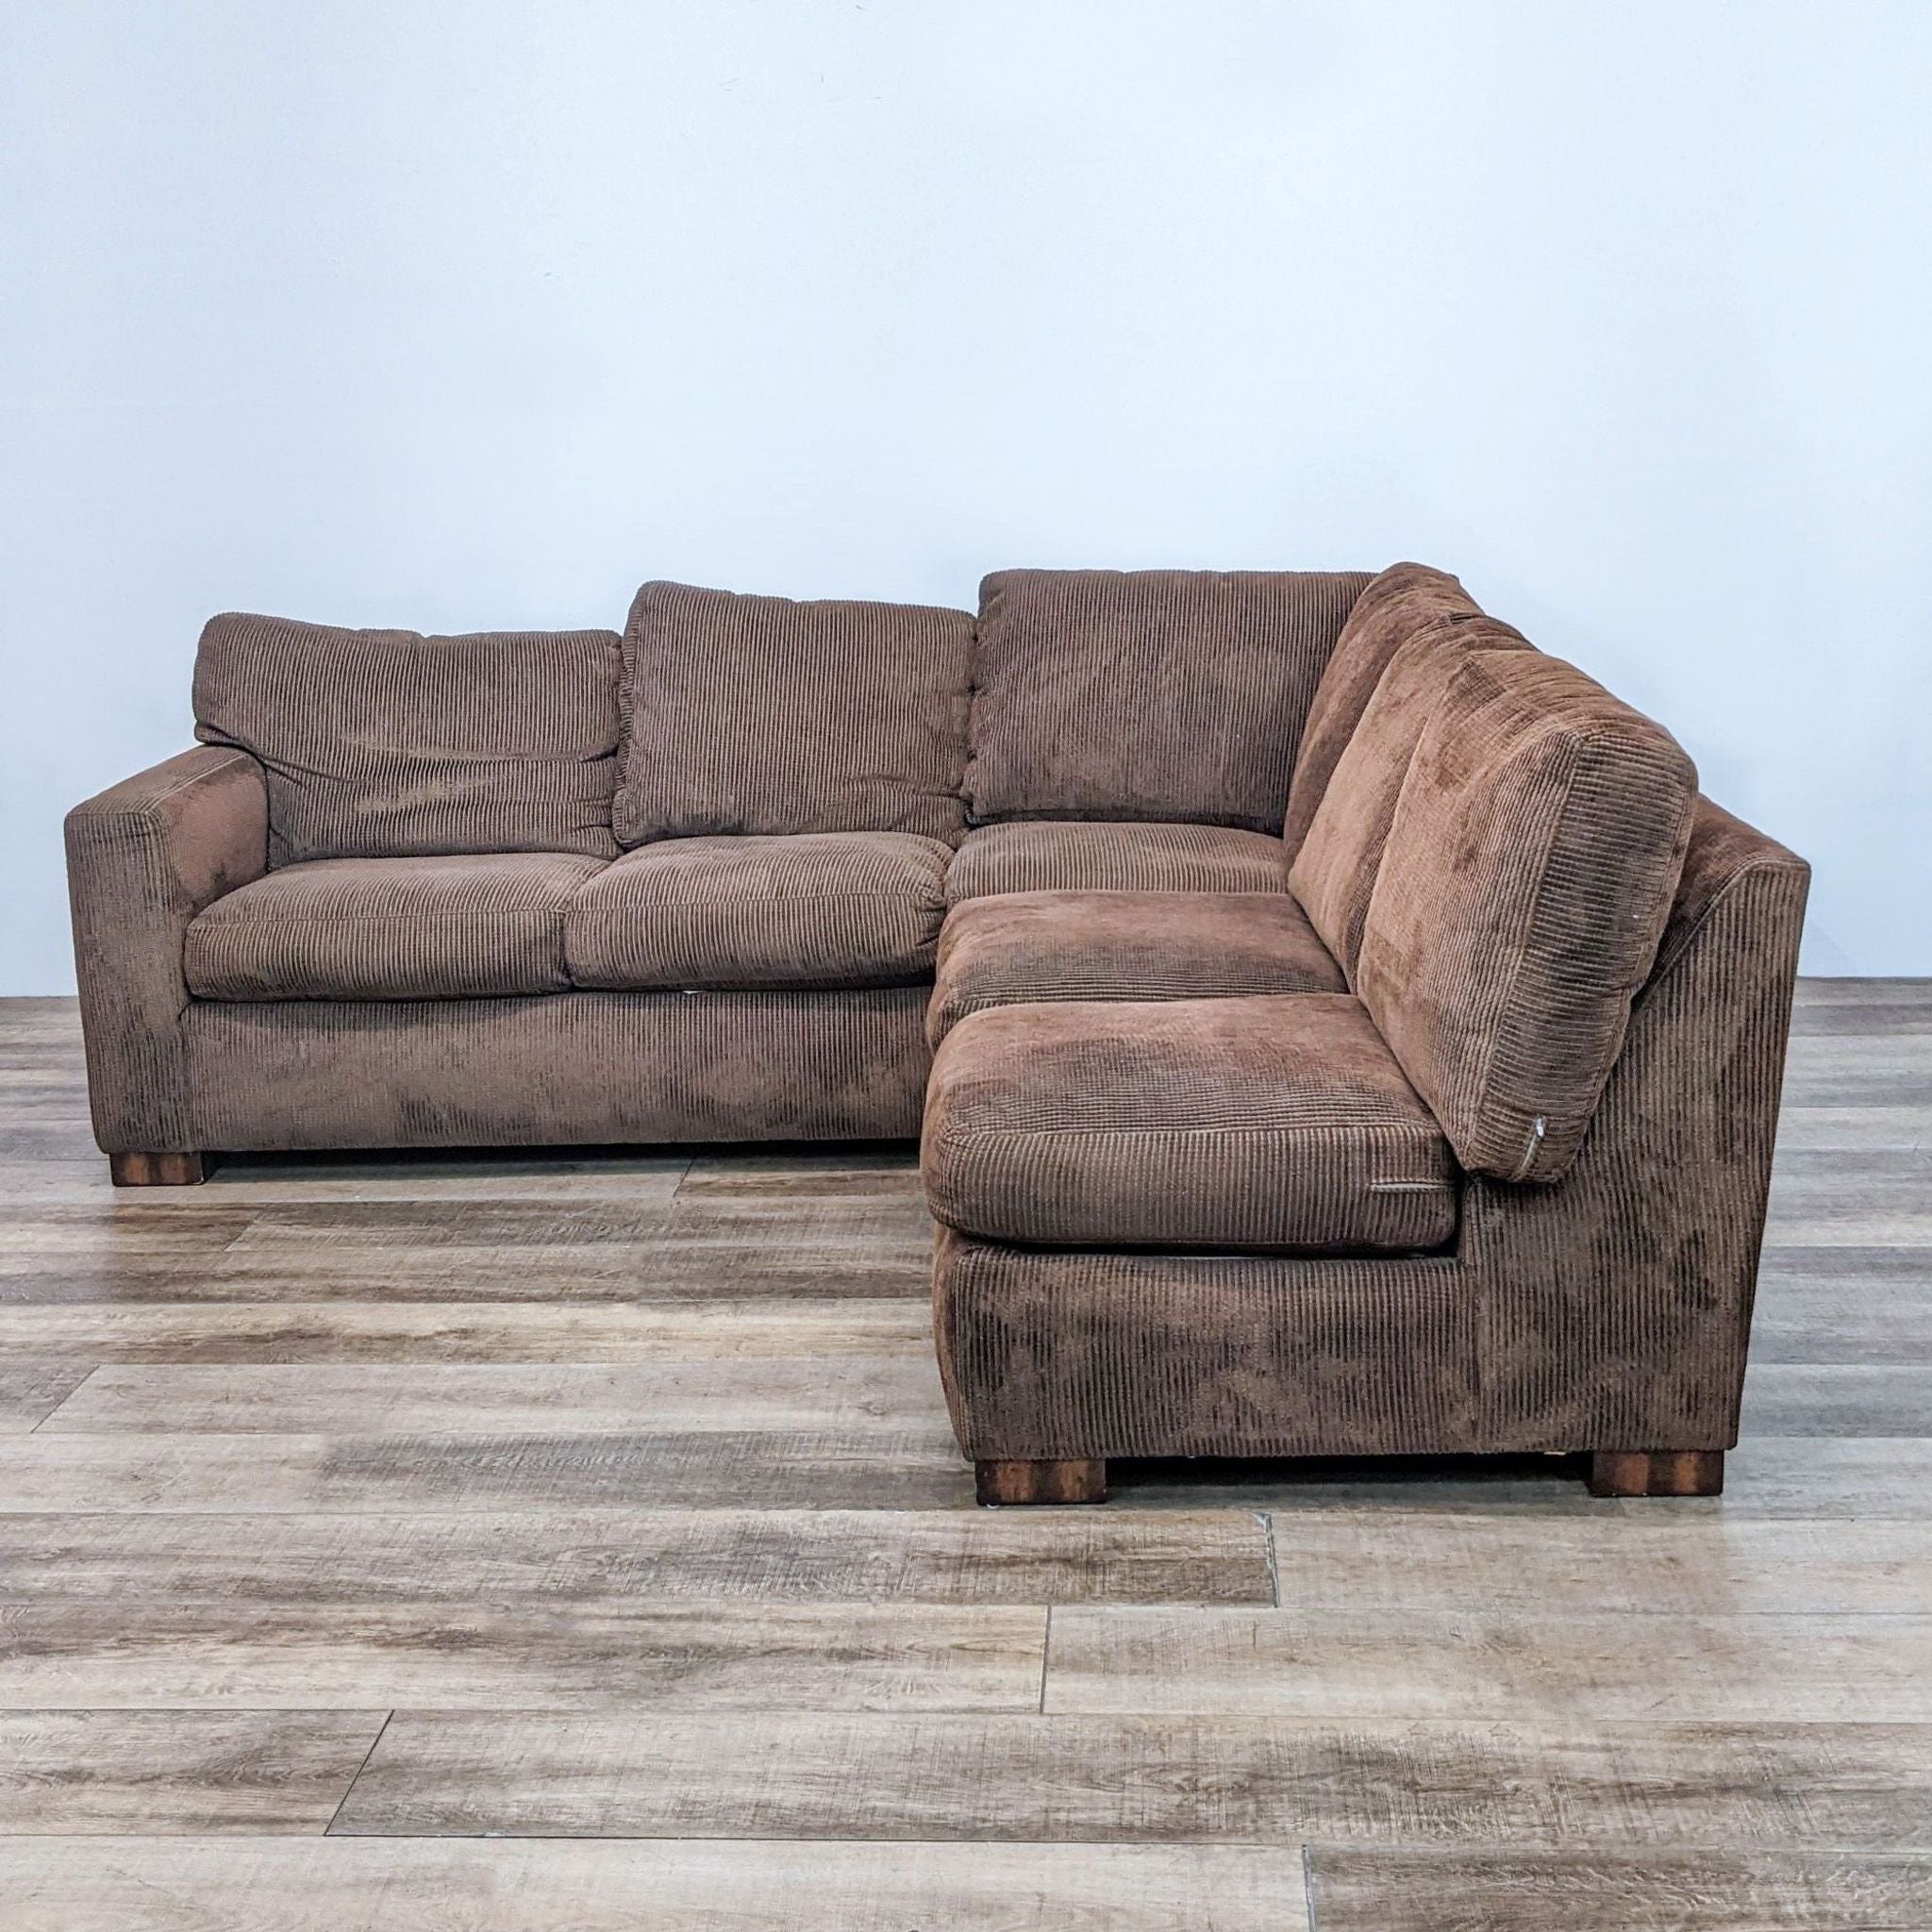 Contemporary Flexsteel brown sectional sofa with down wrapped cushions and a wood finish, displayed on laminate flooring.